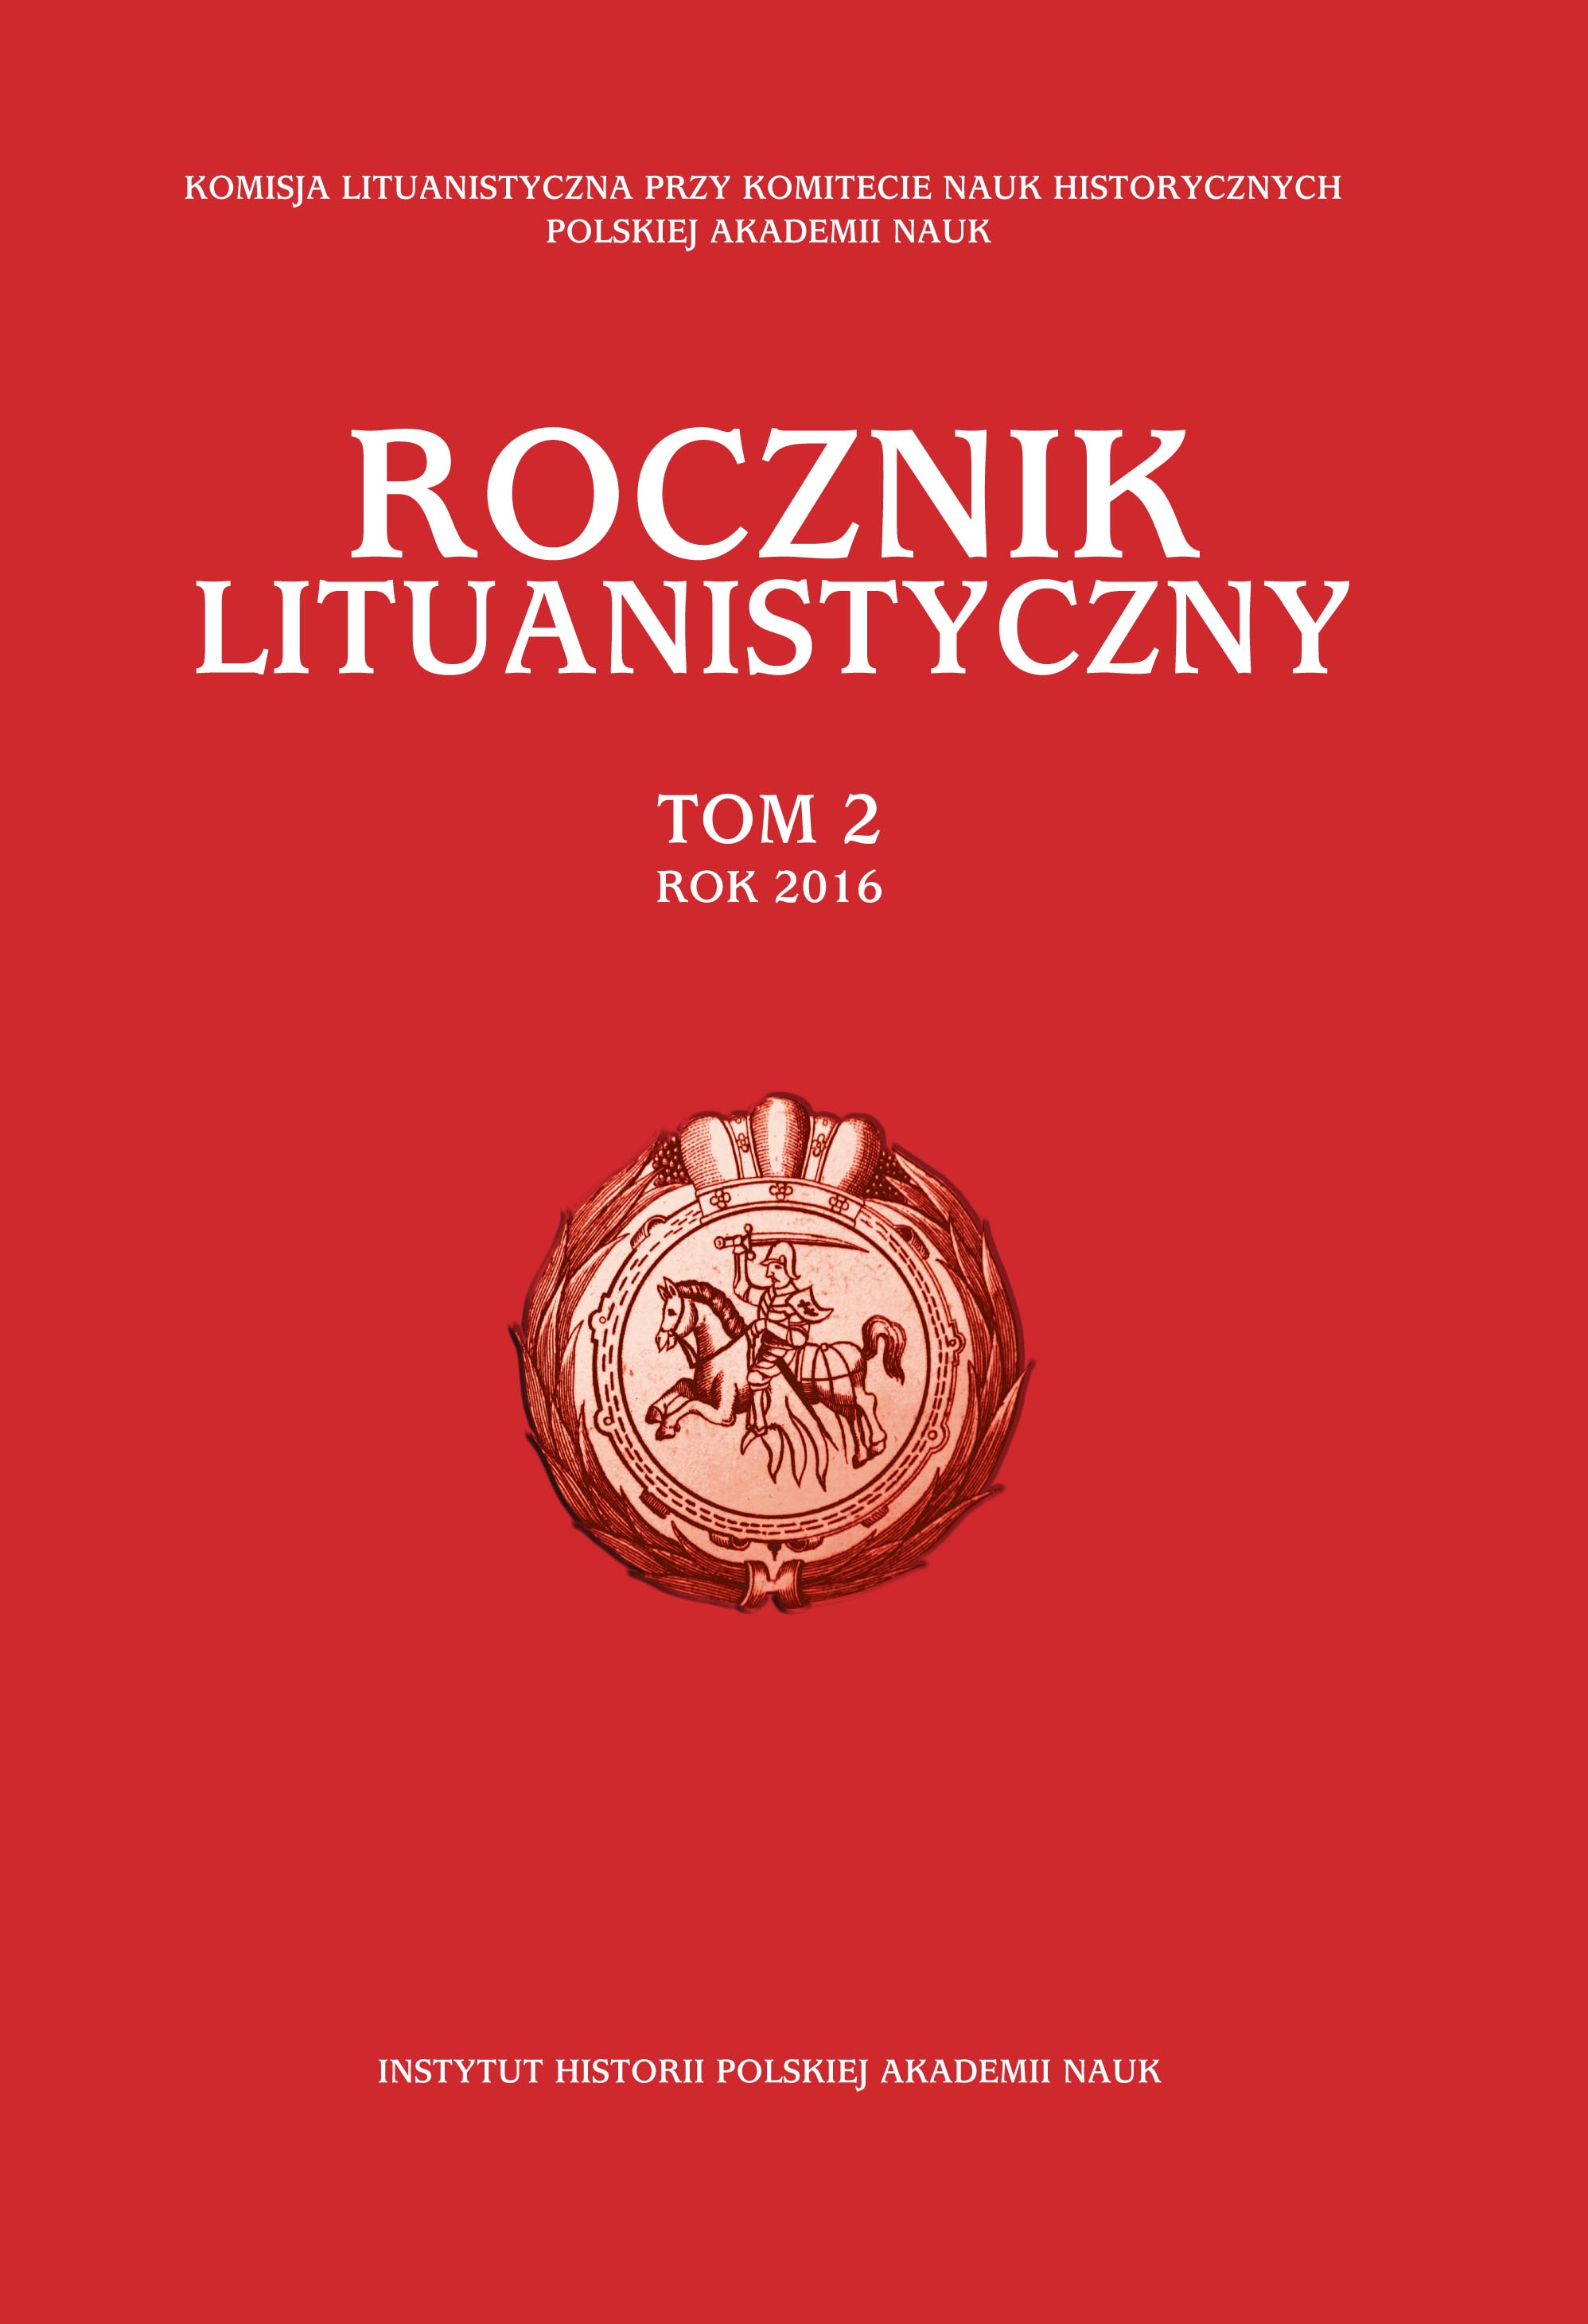 The Lithuanistica Annual